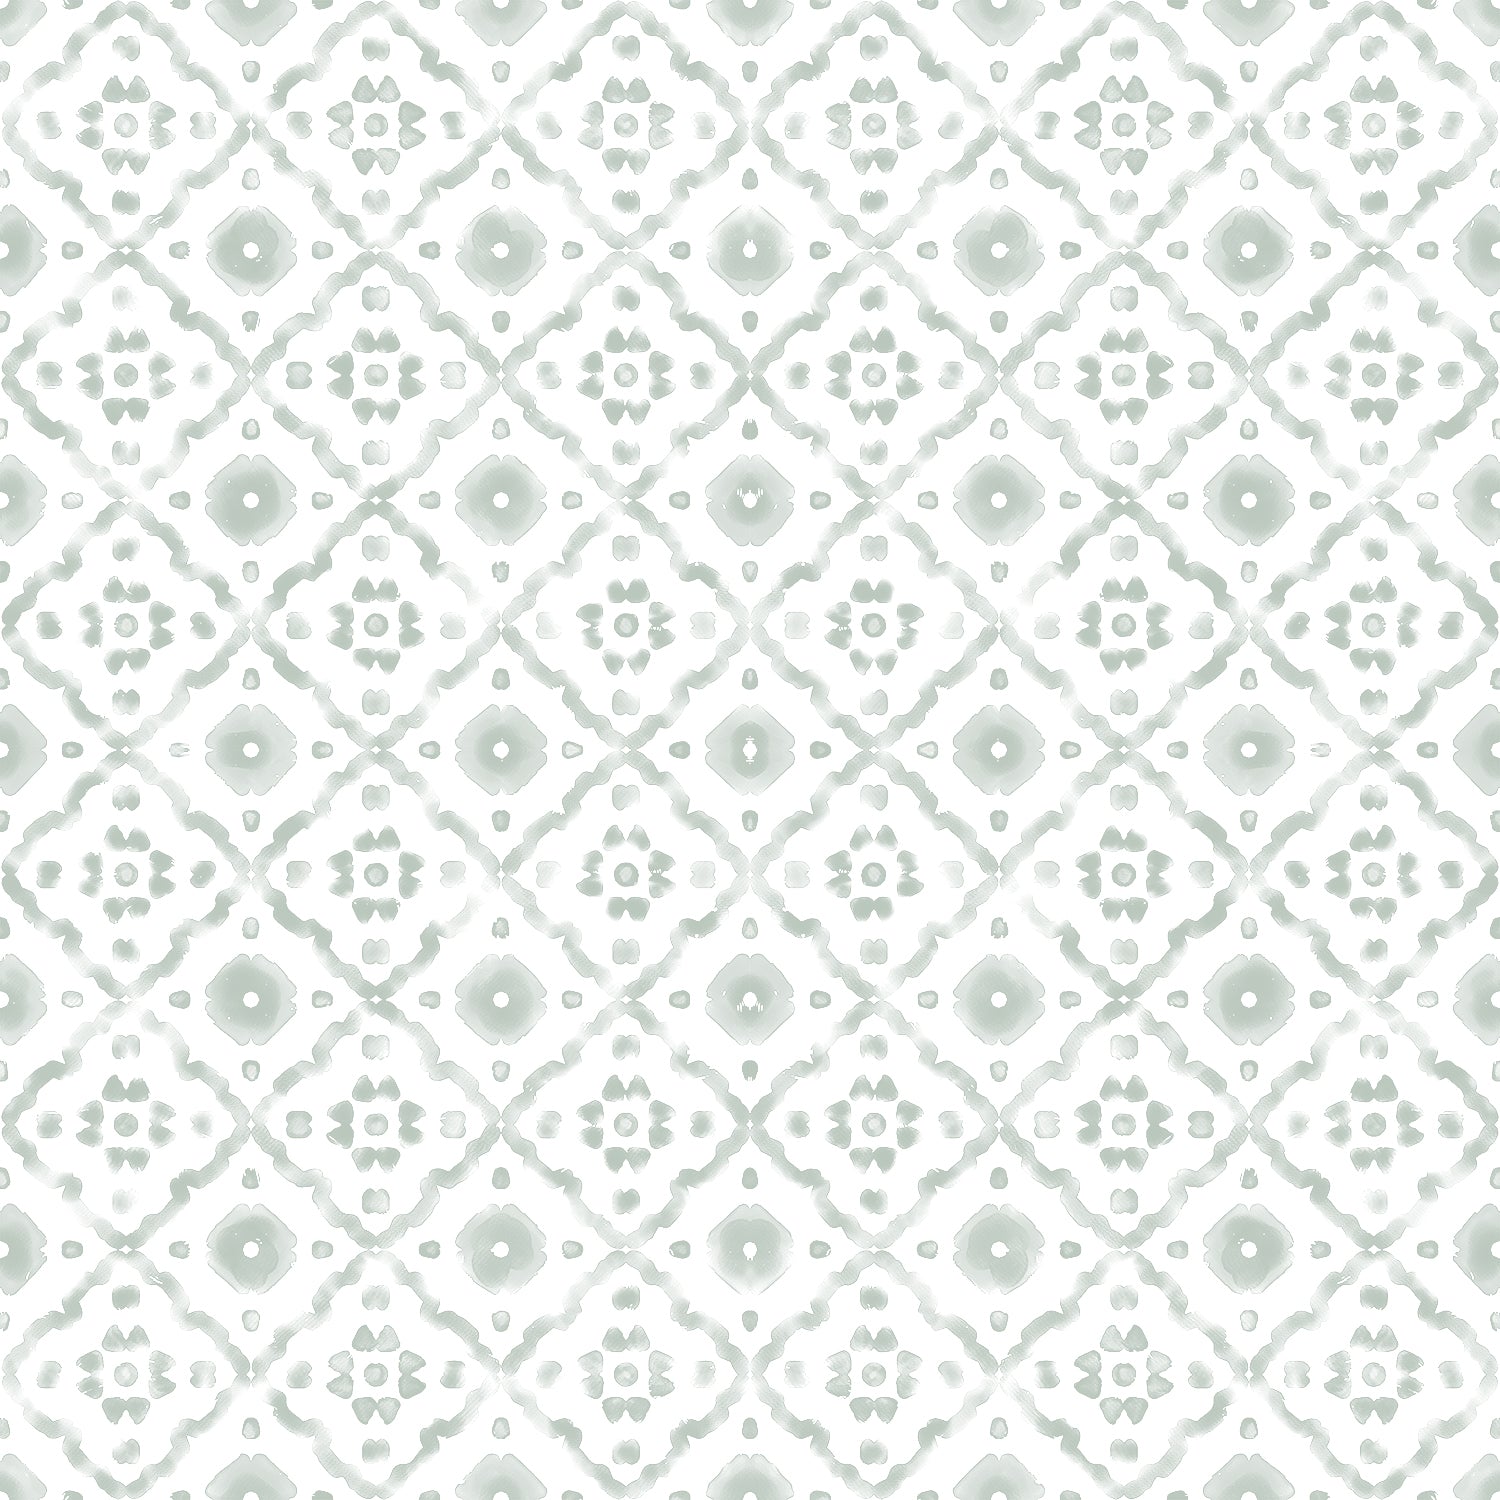 An elegant wallpaper design called Euclid, showcasing a seamless pattern of pale blue geometric flowers on a crisp white background, perfect for adding a subtle touch of sophistication to any room.